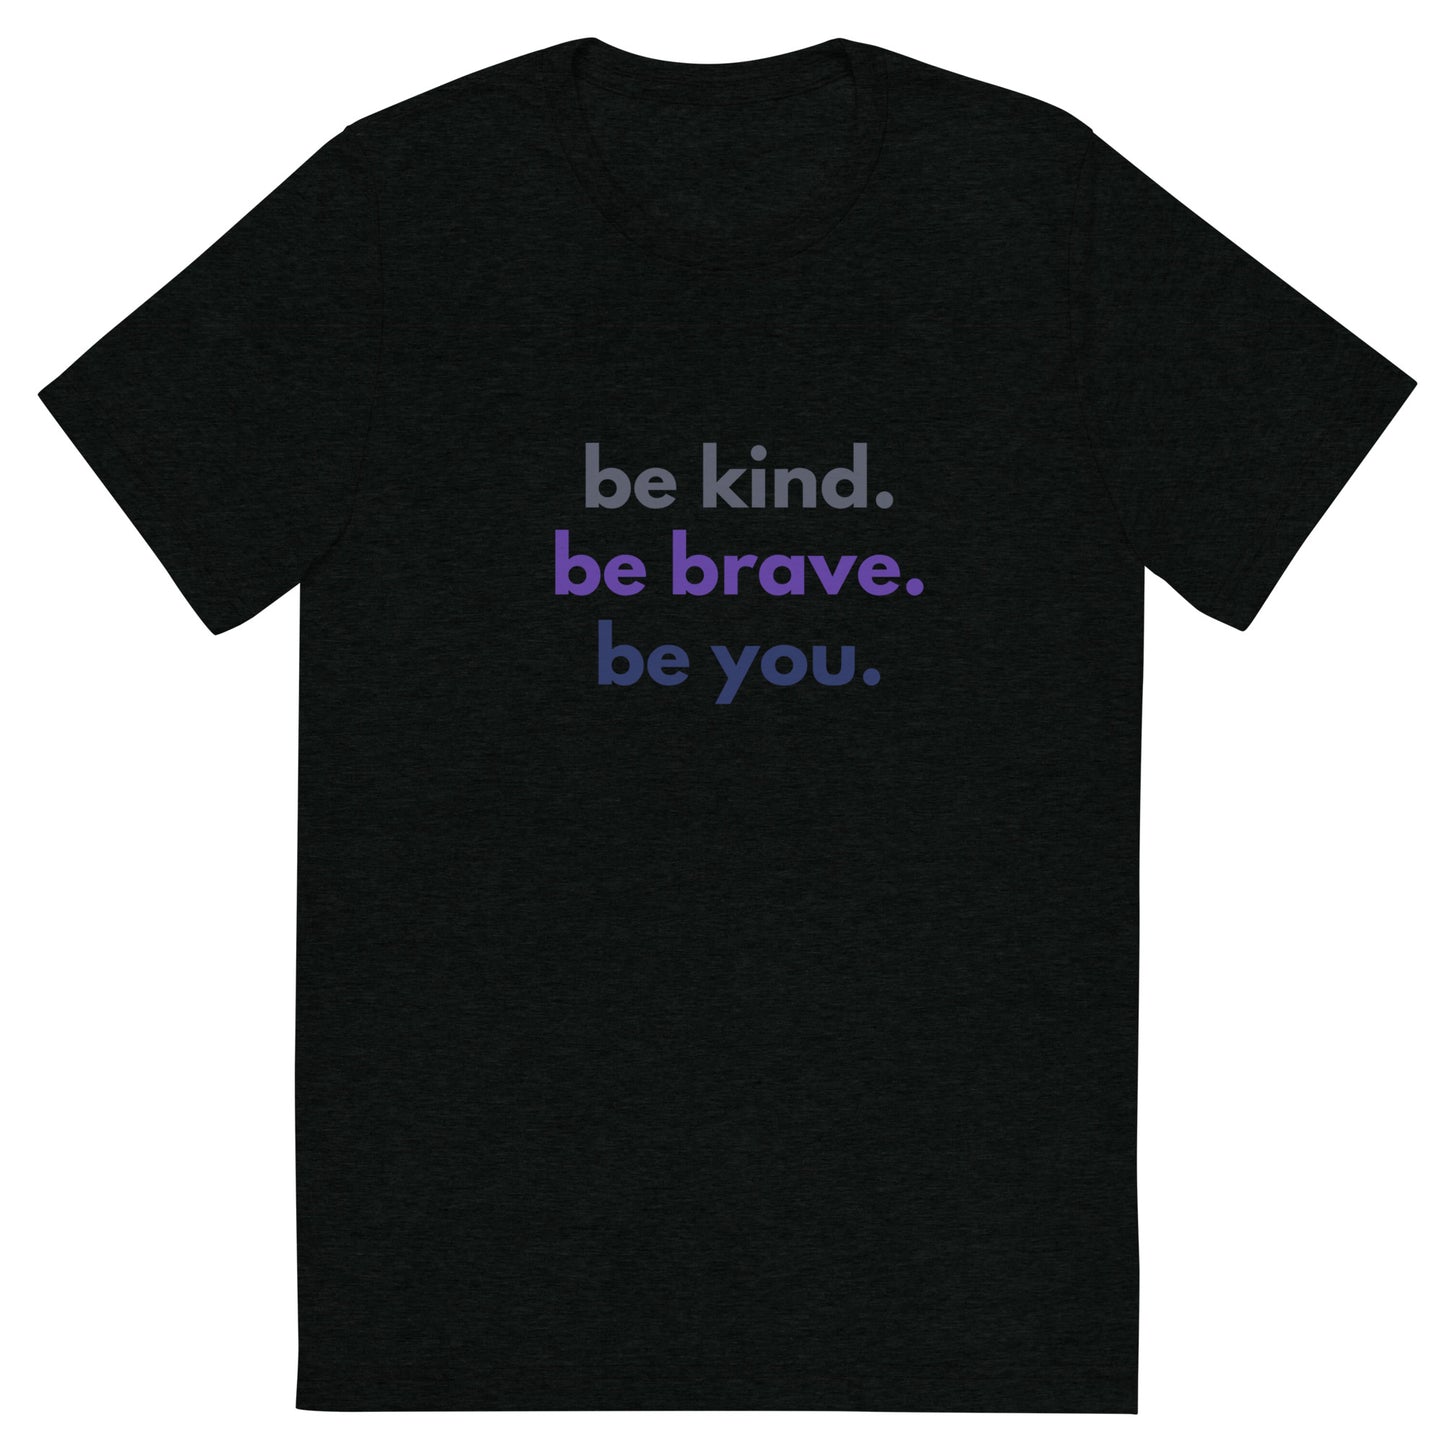 Short sleeve t-shirt - Be kind. Be brave. Be you.